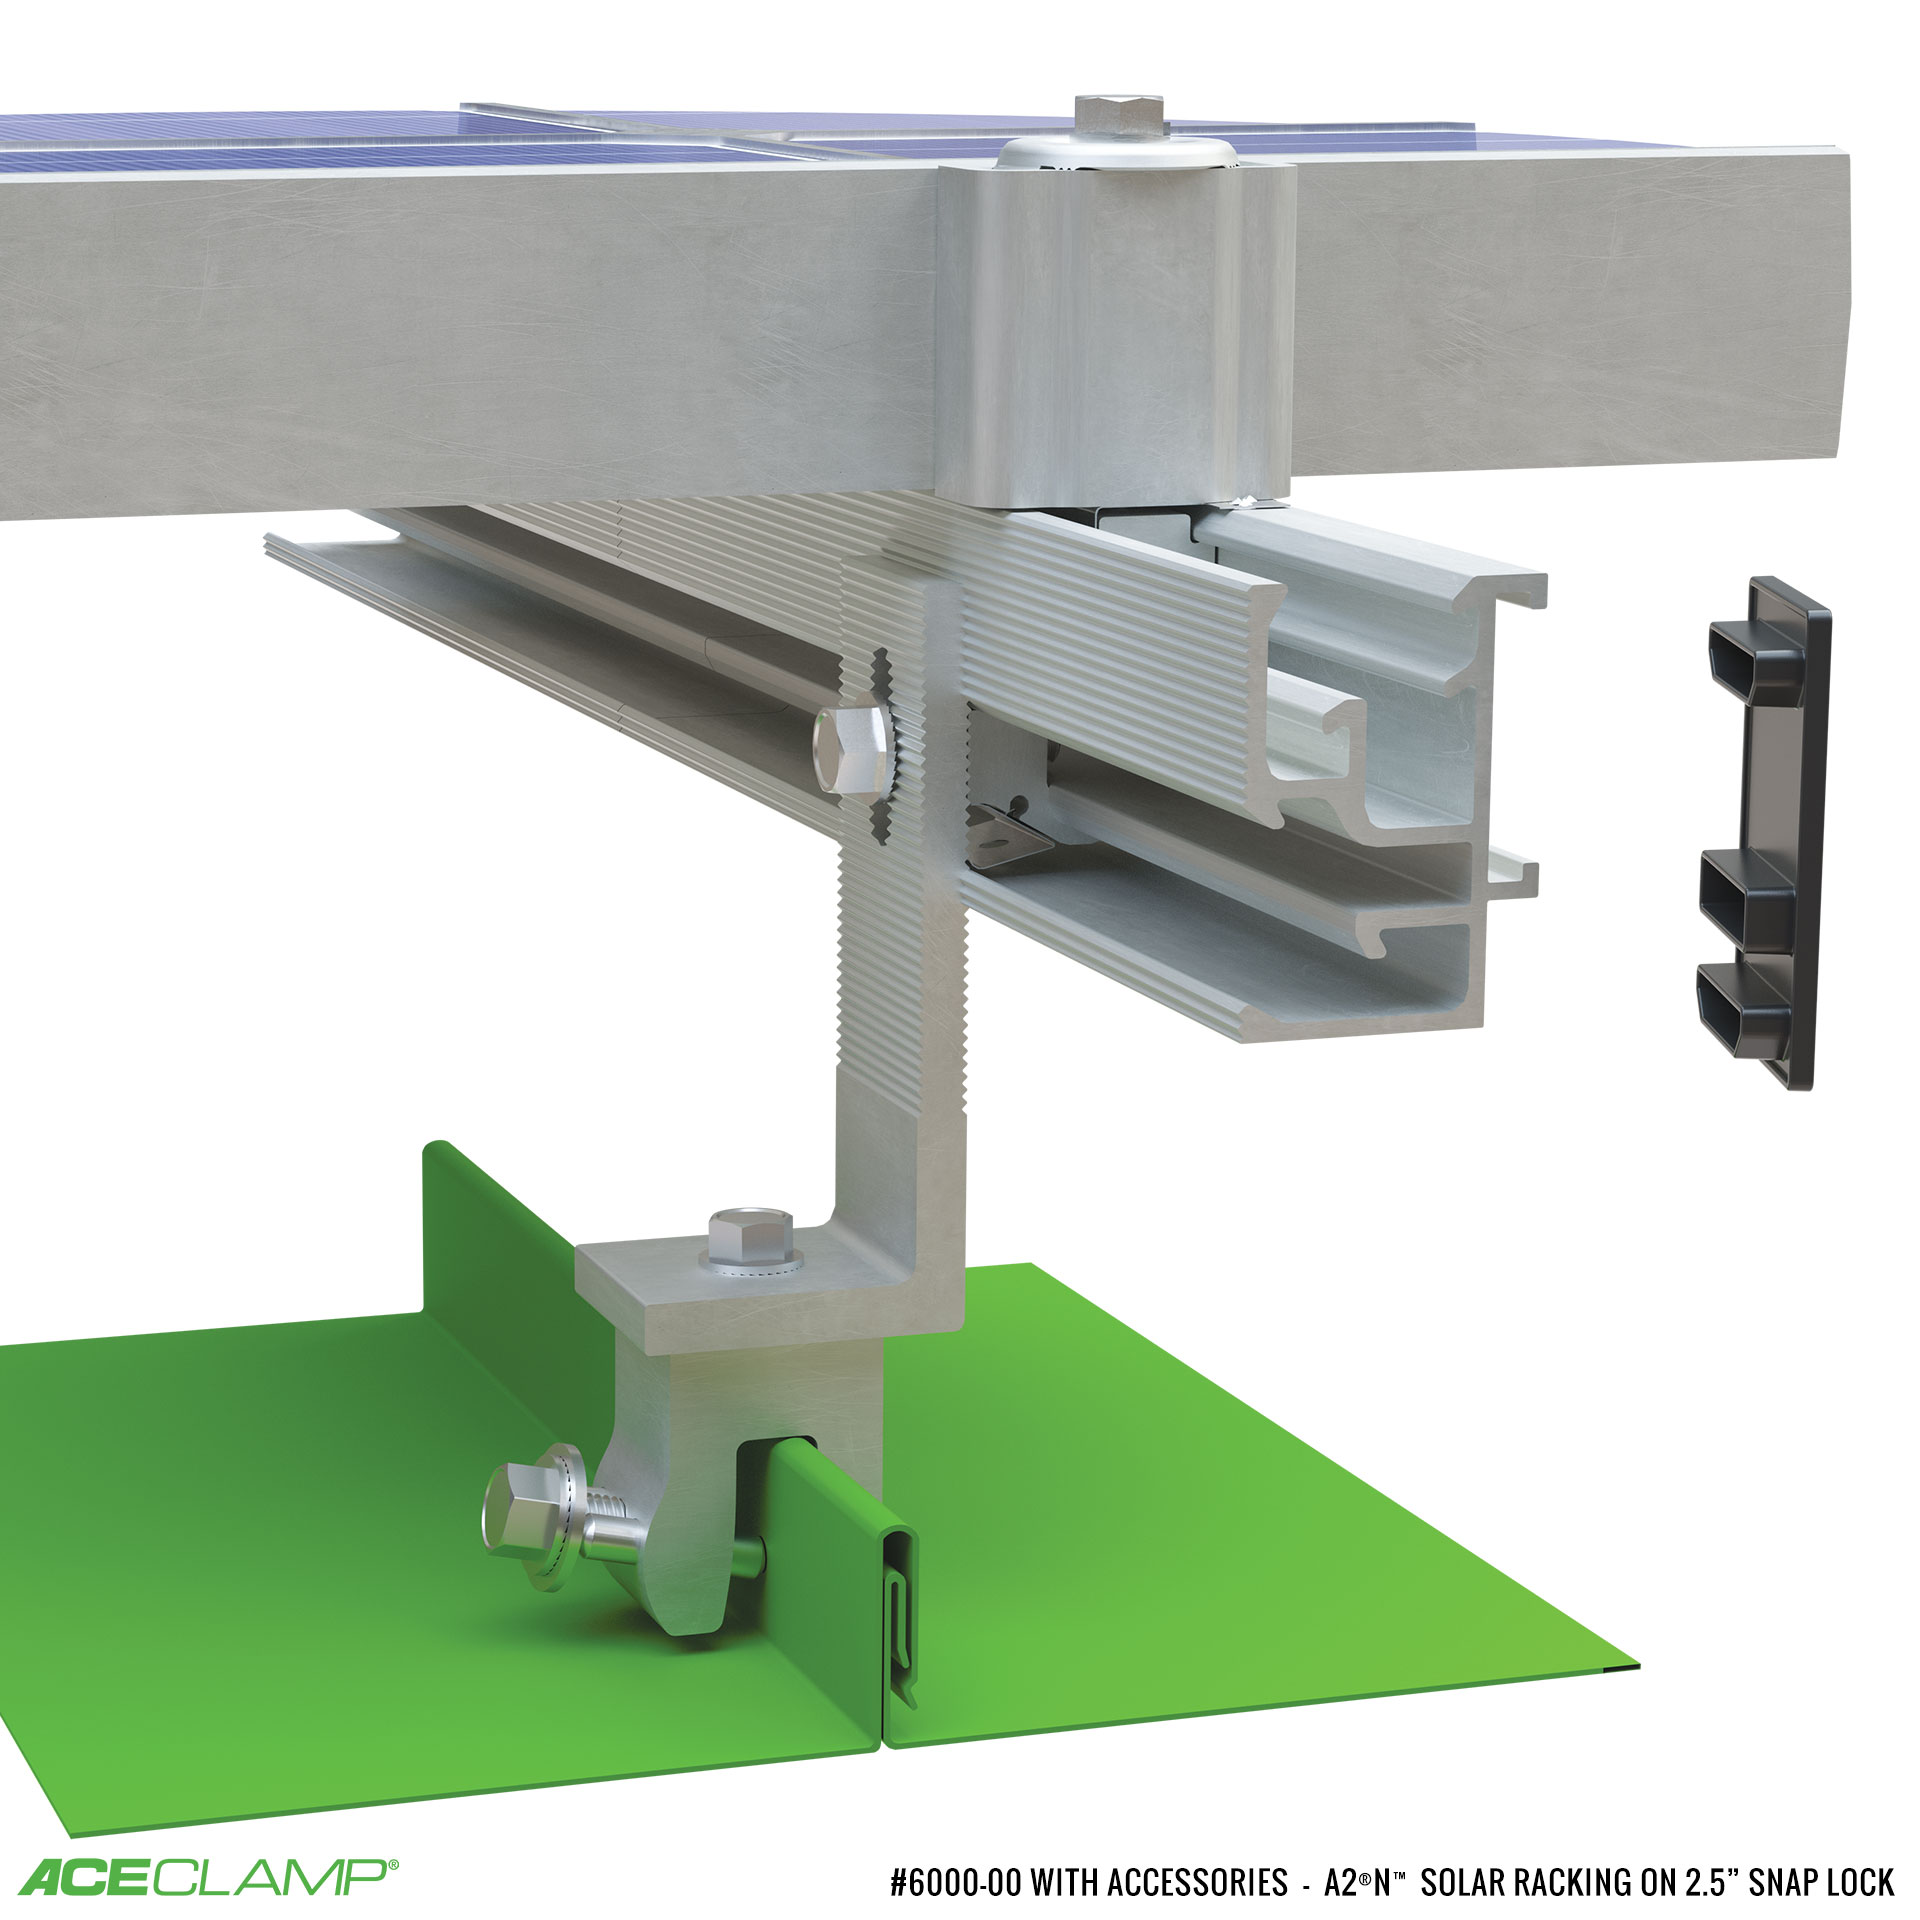 Rolled top standing seam clamp - Solar mounting systems and metal